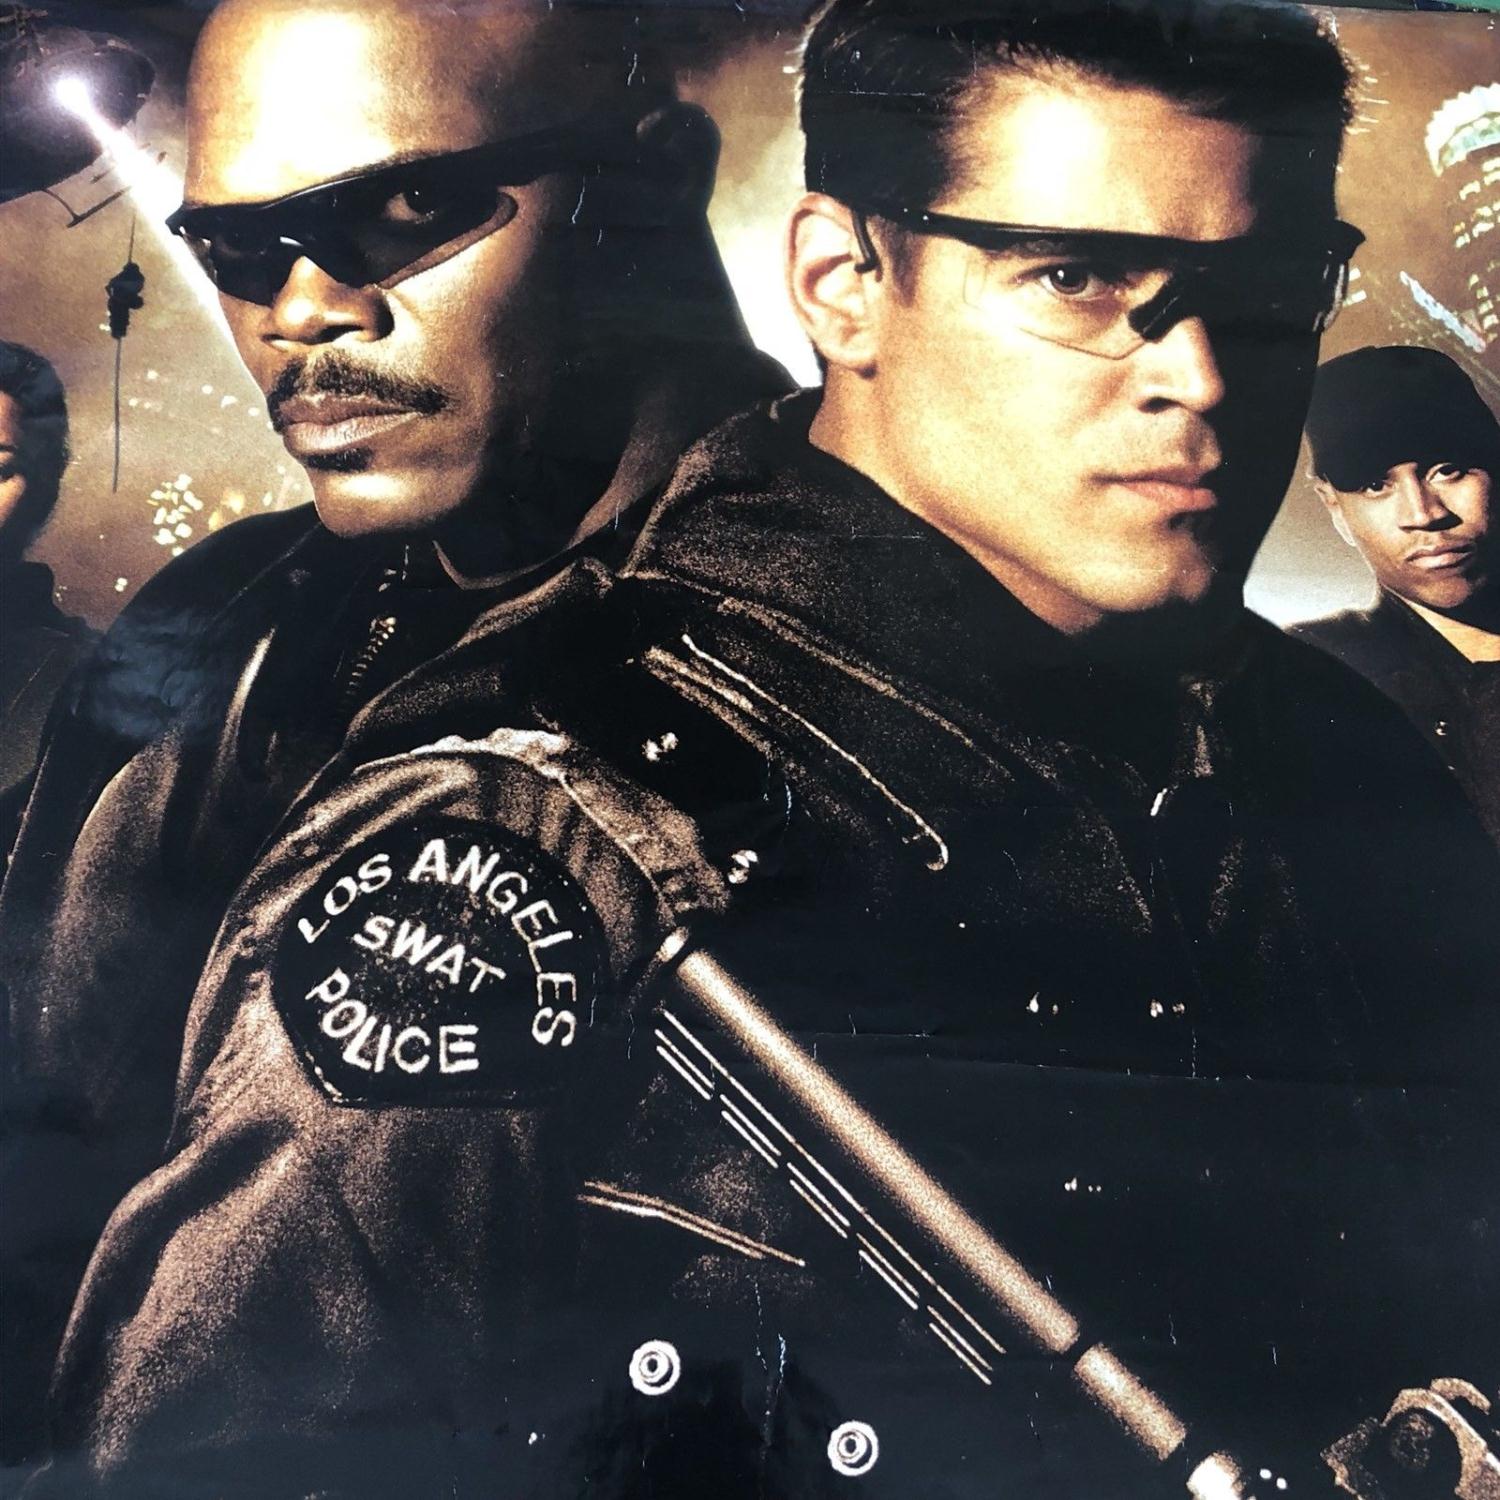 S.W.A.T CINEMA QUAD POSTER 2003 Samuel L Jackson Colin Farrell LAPD - Rolled - Image 3 of 3